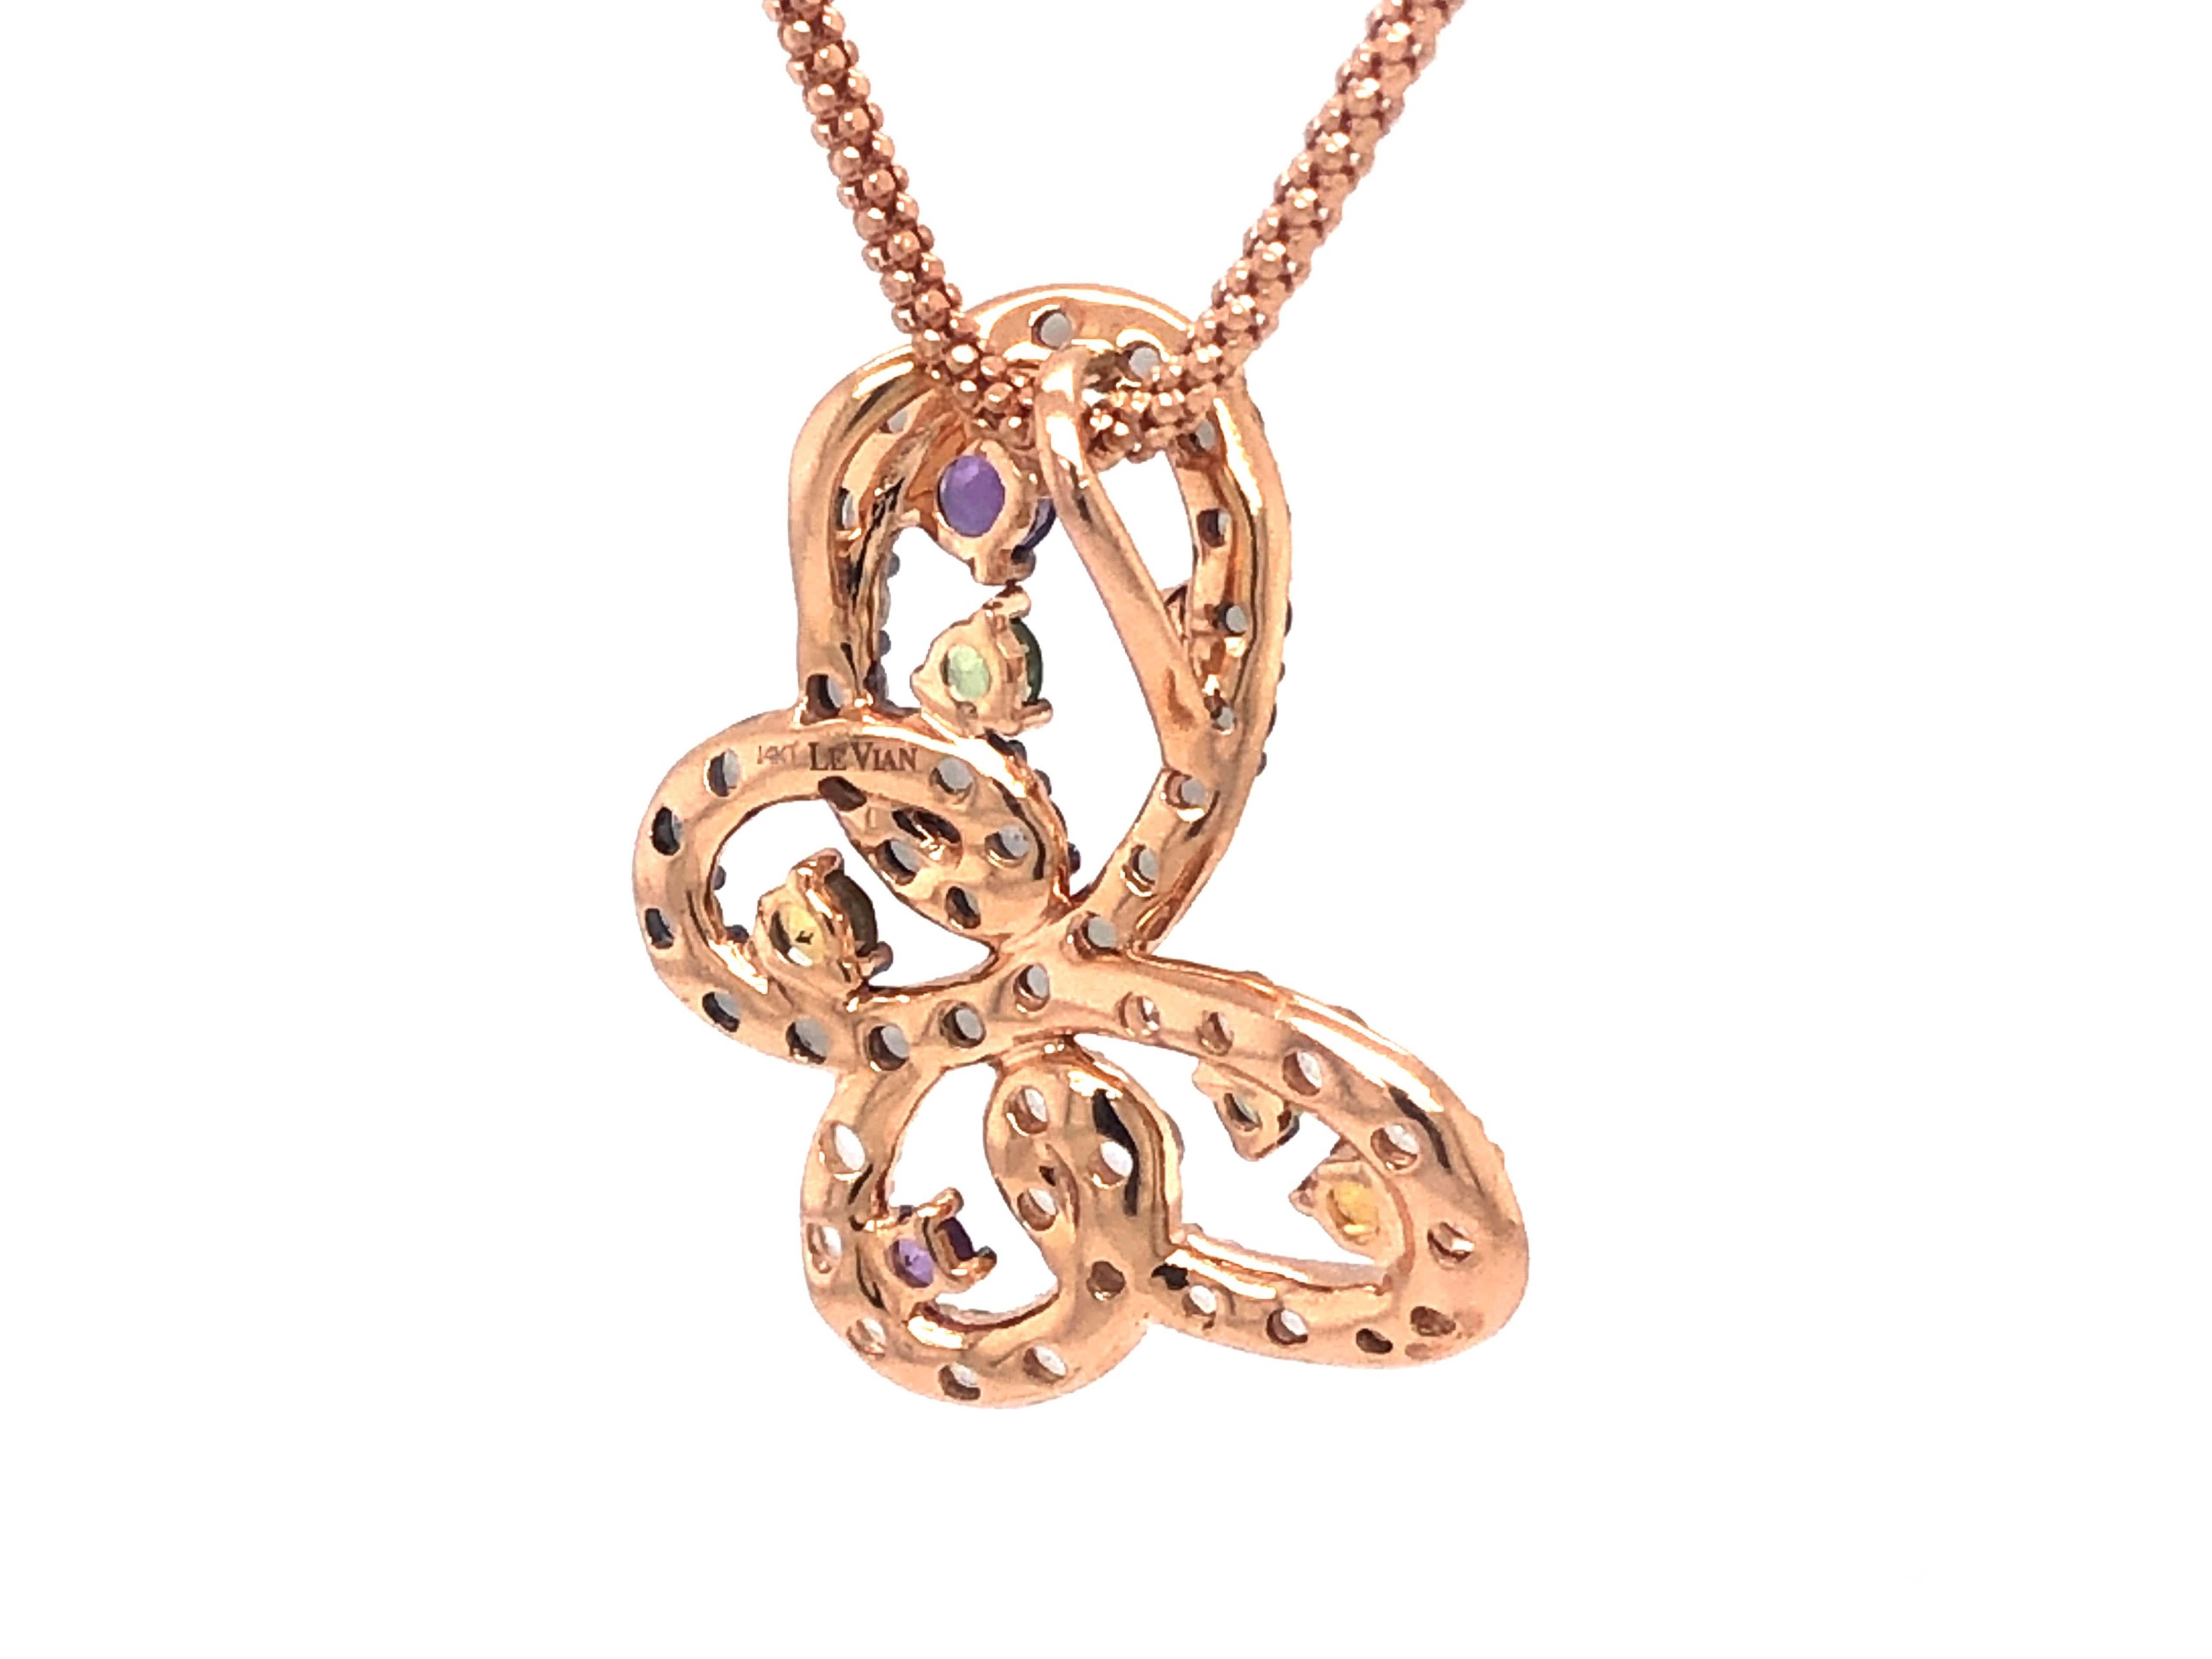 LeVian Multi Gemstone Butterfly Necklace in 14K Rose Gold In Excellent Condition For Sale In Honolulu, HI